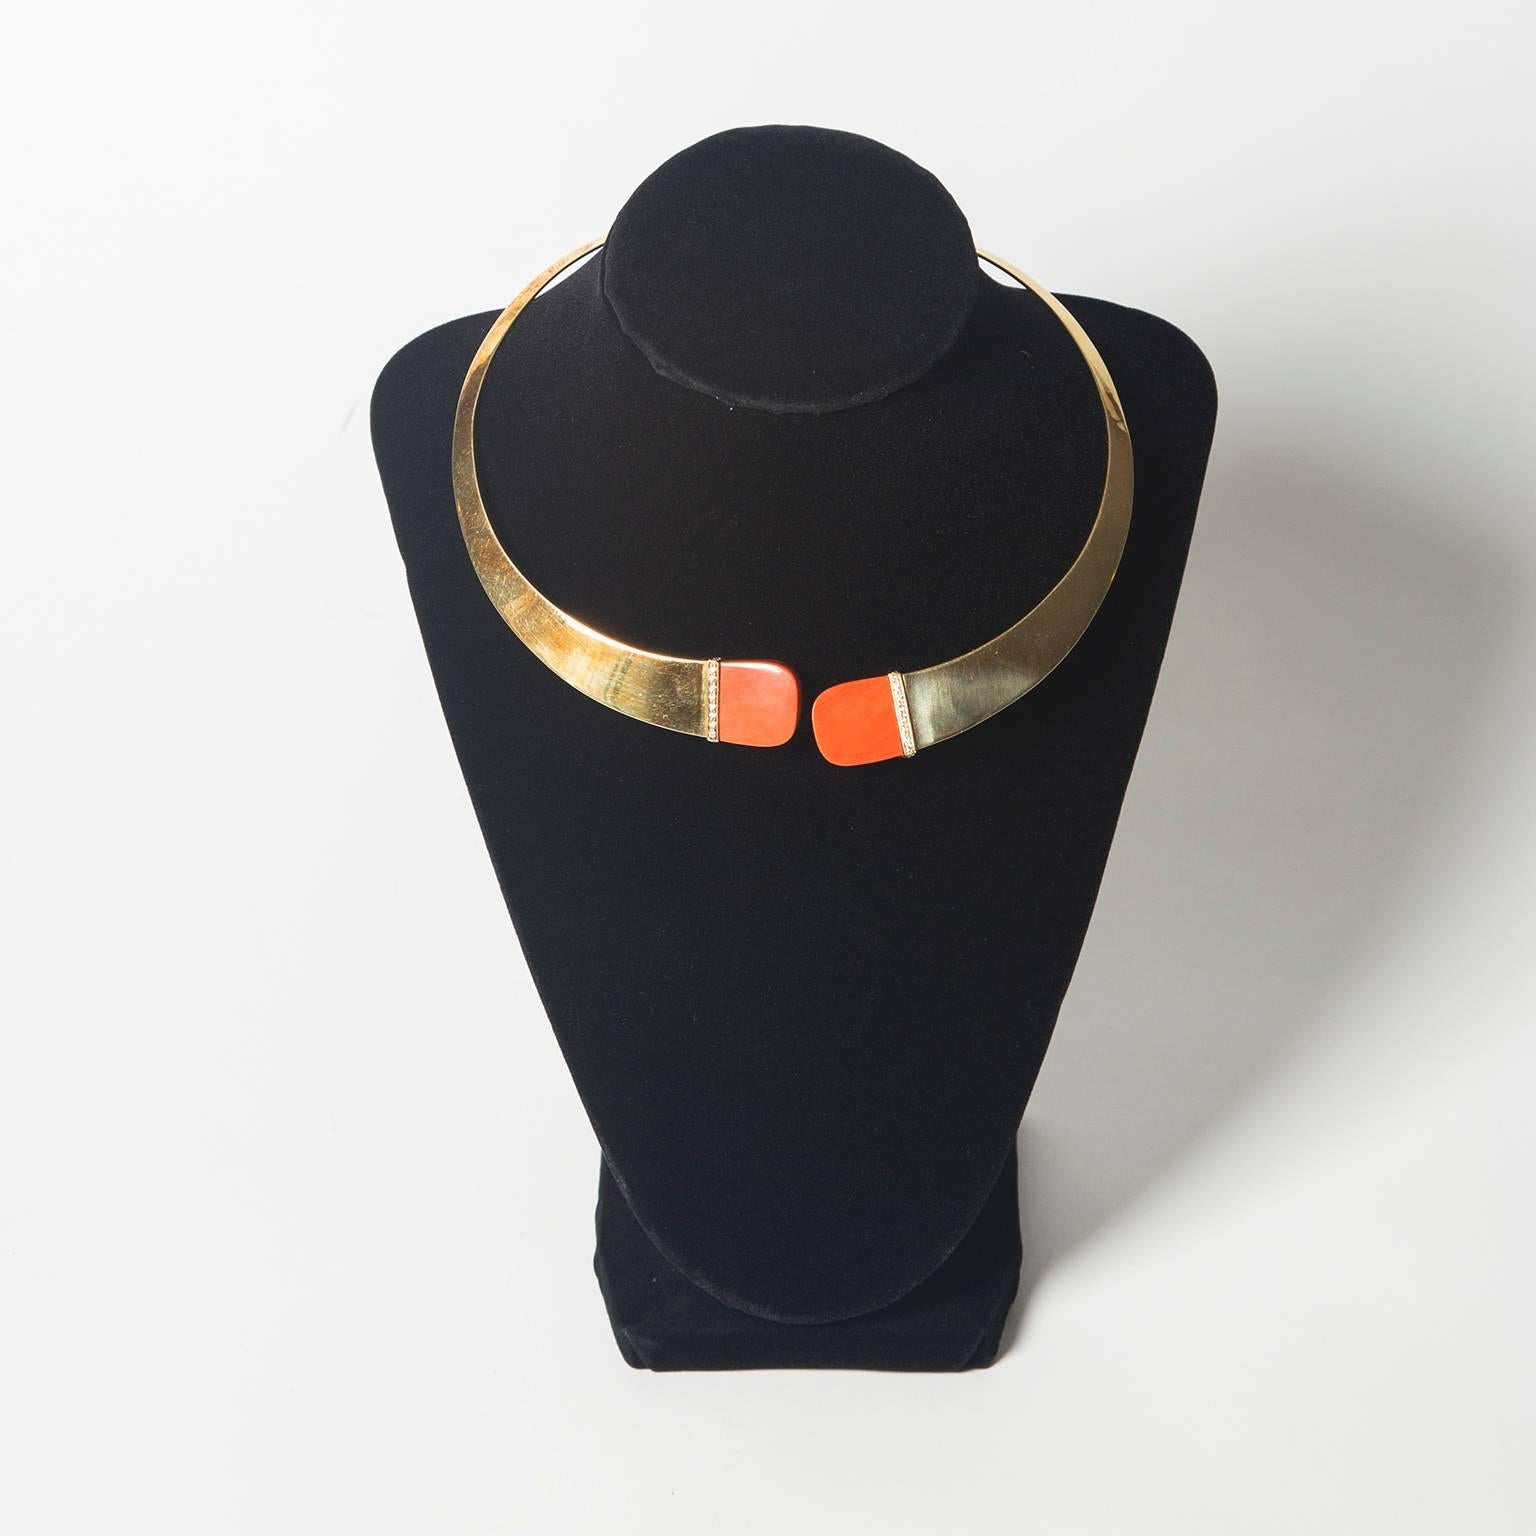 1970's inspired solid 18 karat gold collar necklace with precious coral accents, bordered by a row of perfectly cut diamonds. 